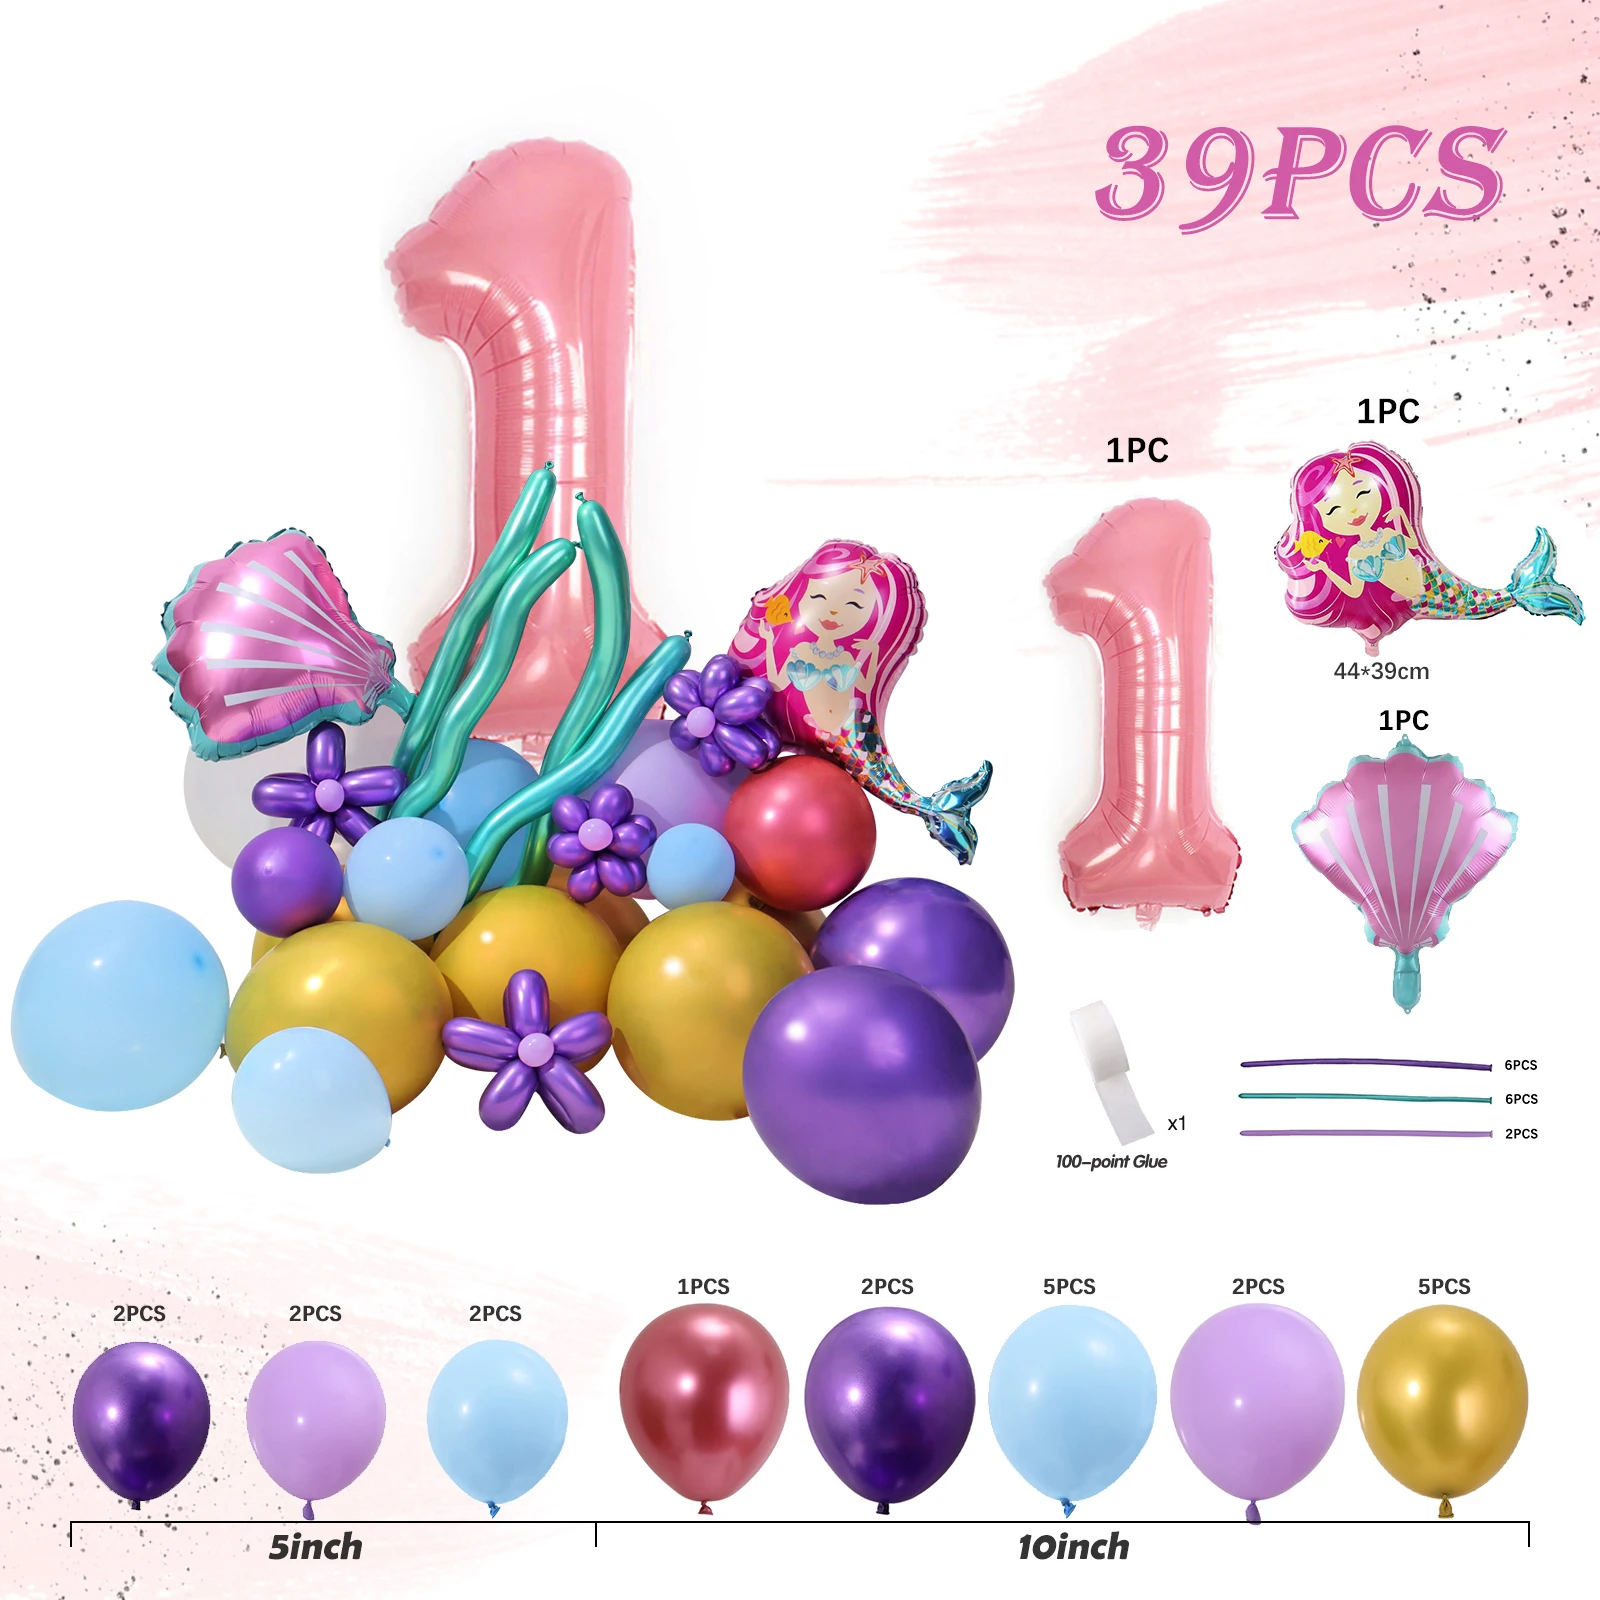 

Mermaid Balloon Digital Balloon Foil Balloon Tower Balloons Party Decoration Wedding Baby Shower Birthday Party Decorations Arch